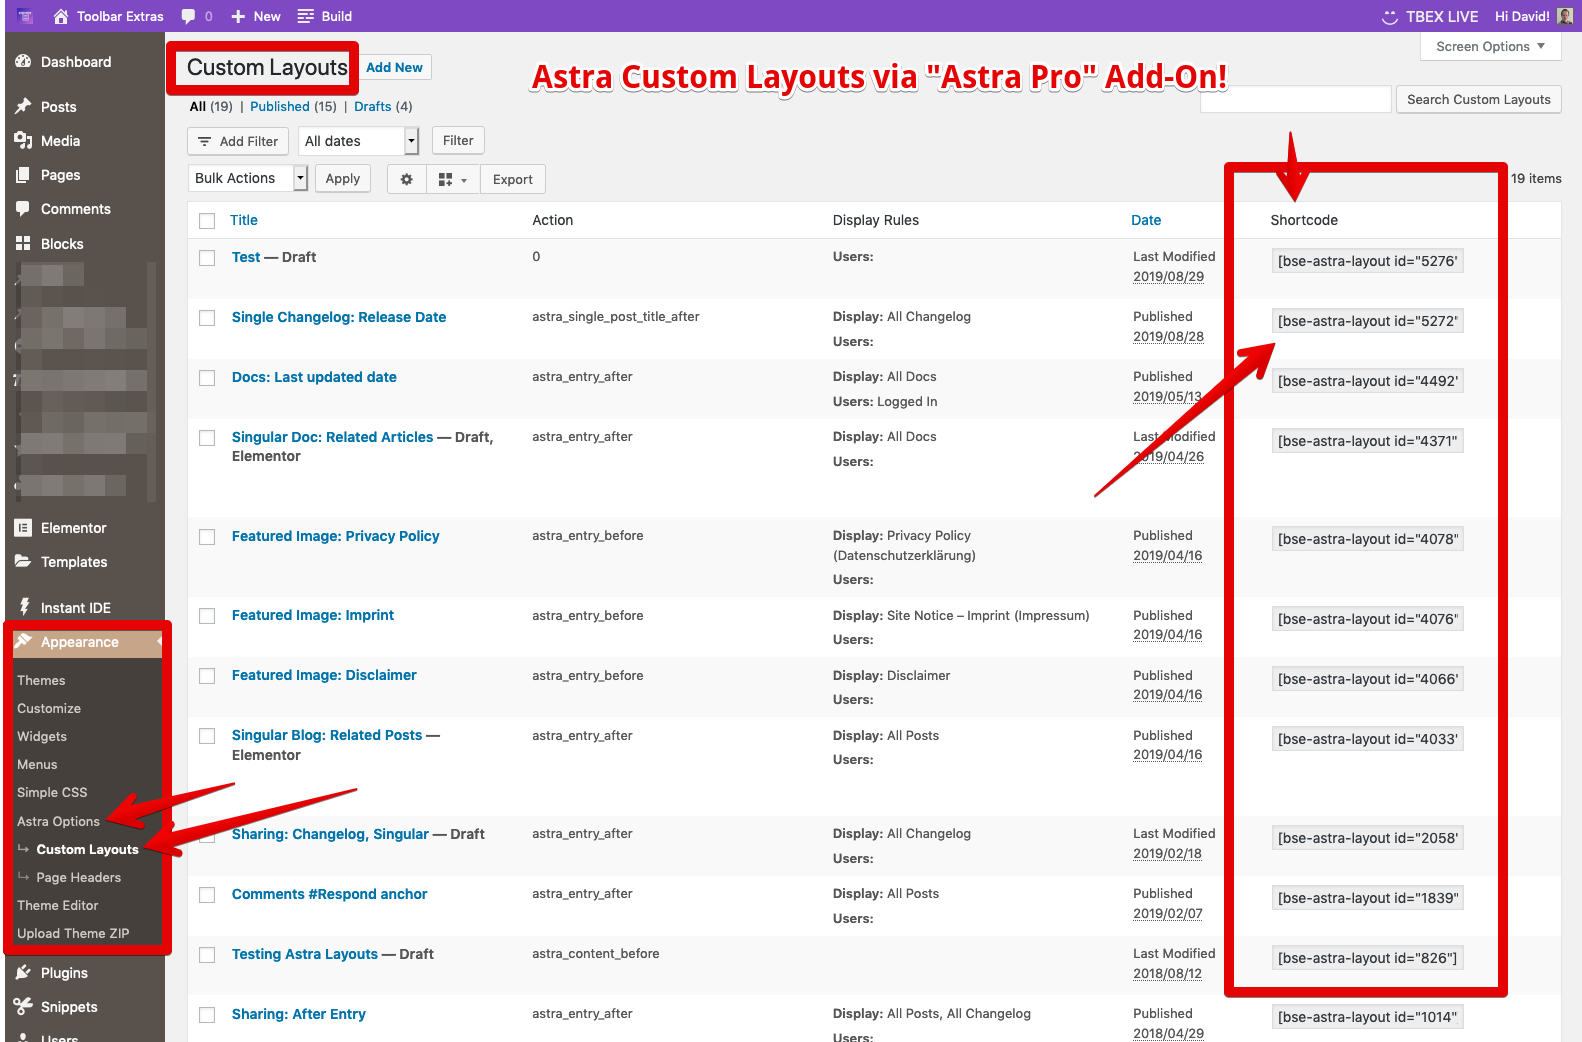 For Astra Pro: Shortcode for each Astra Custom Layout - great for reusage